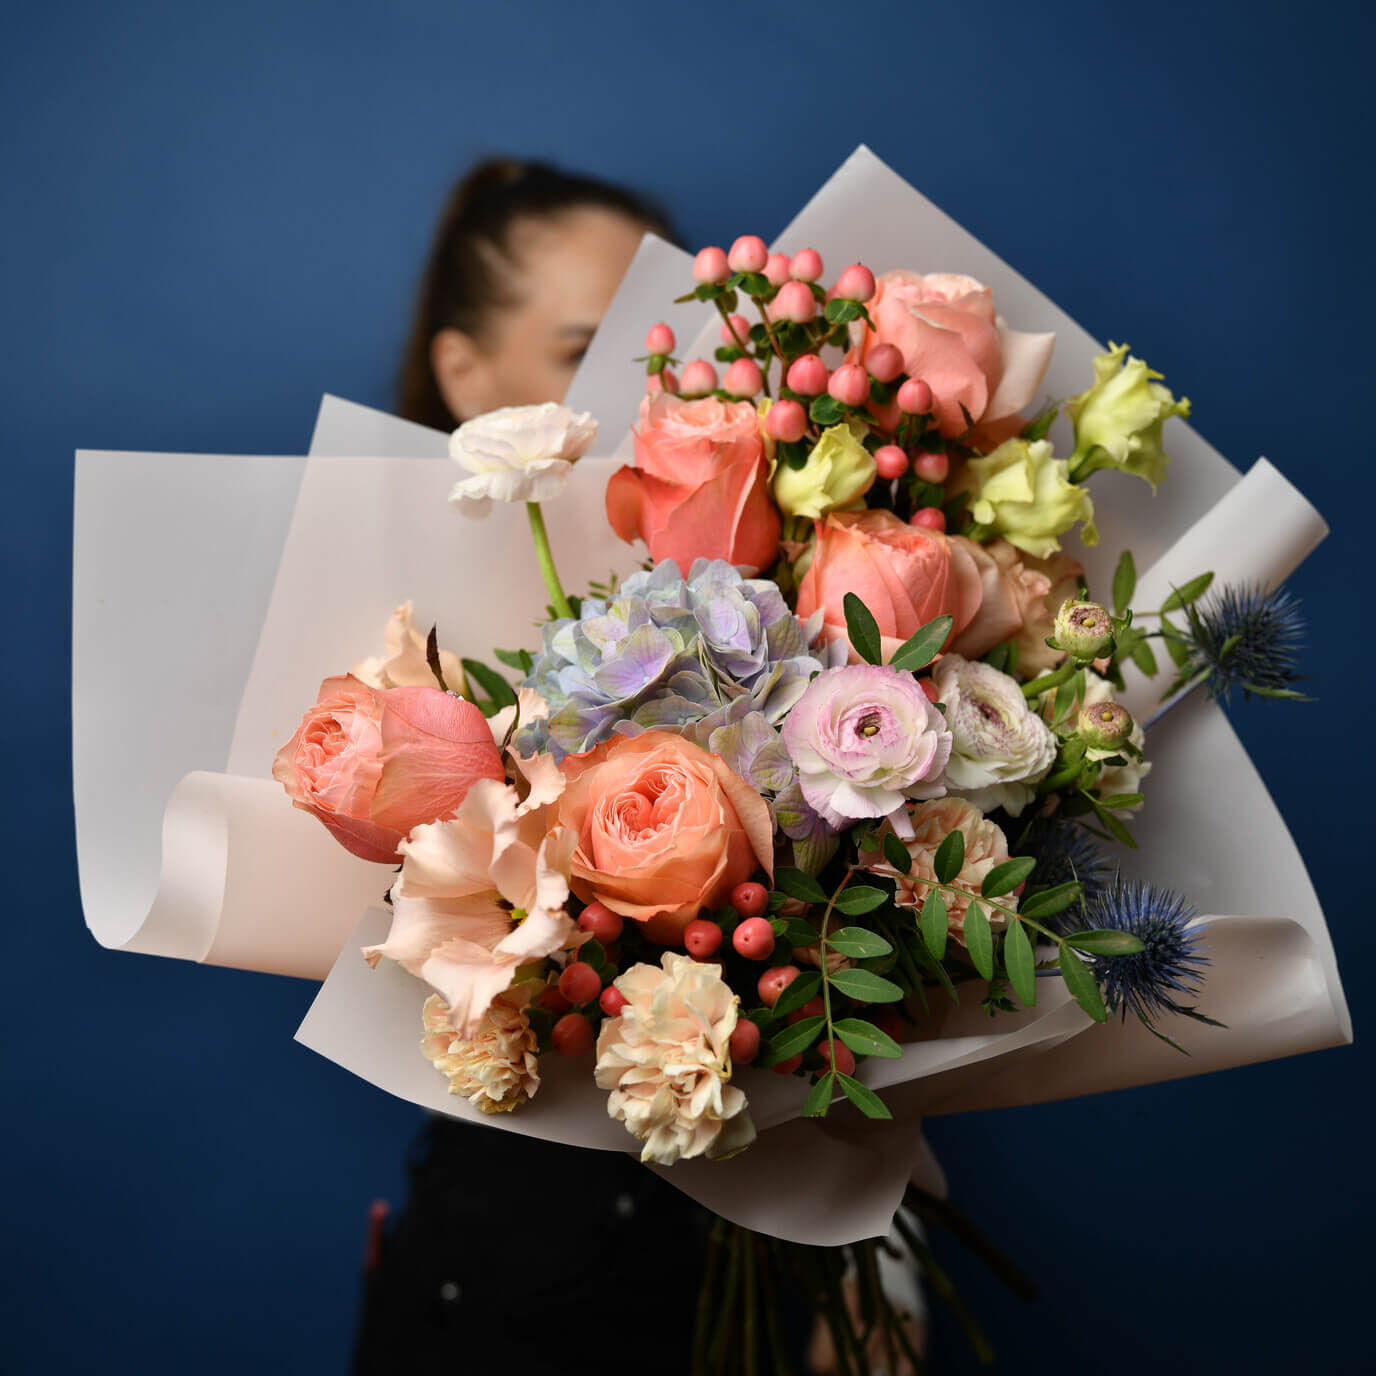 Bouquet with roses, lisianthus and hydrangea